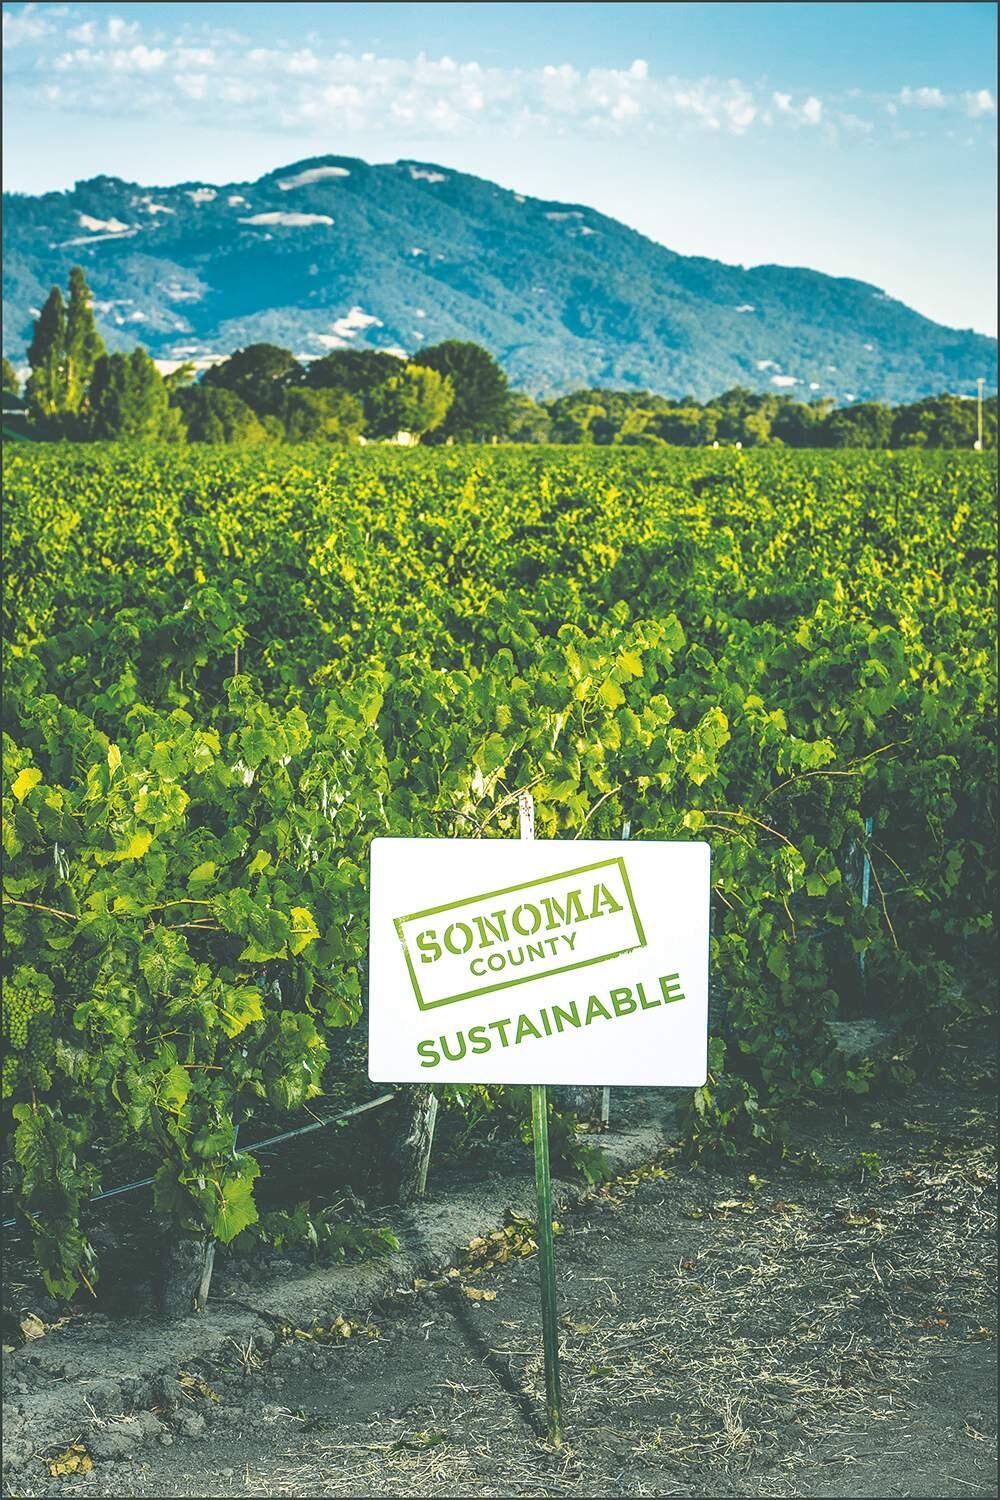 Sonoma County wine group is pledged to make the county wine industry 100% sustainable.